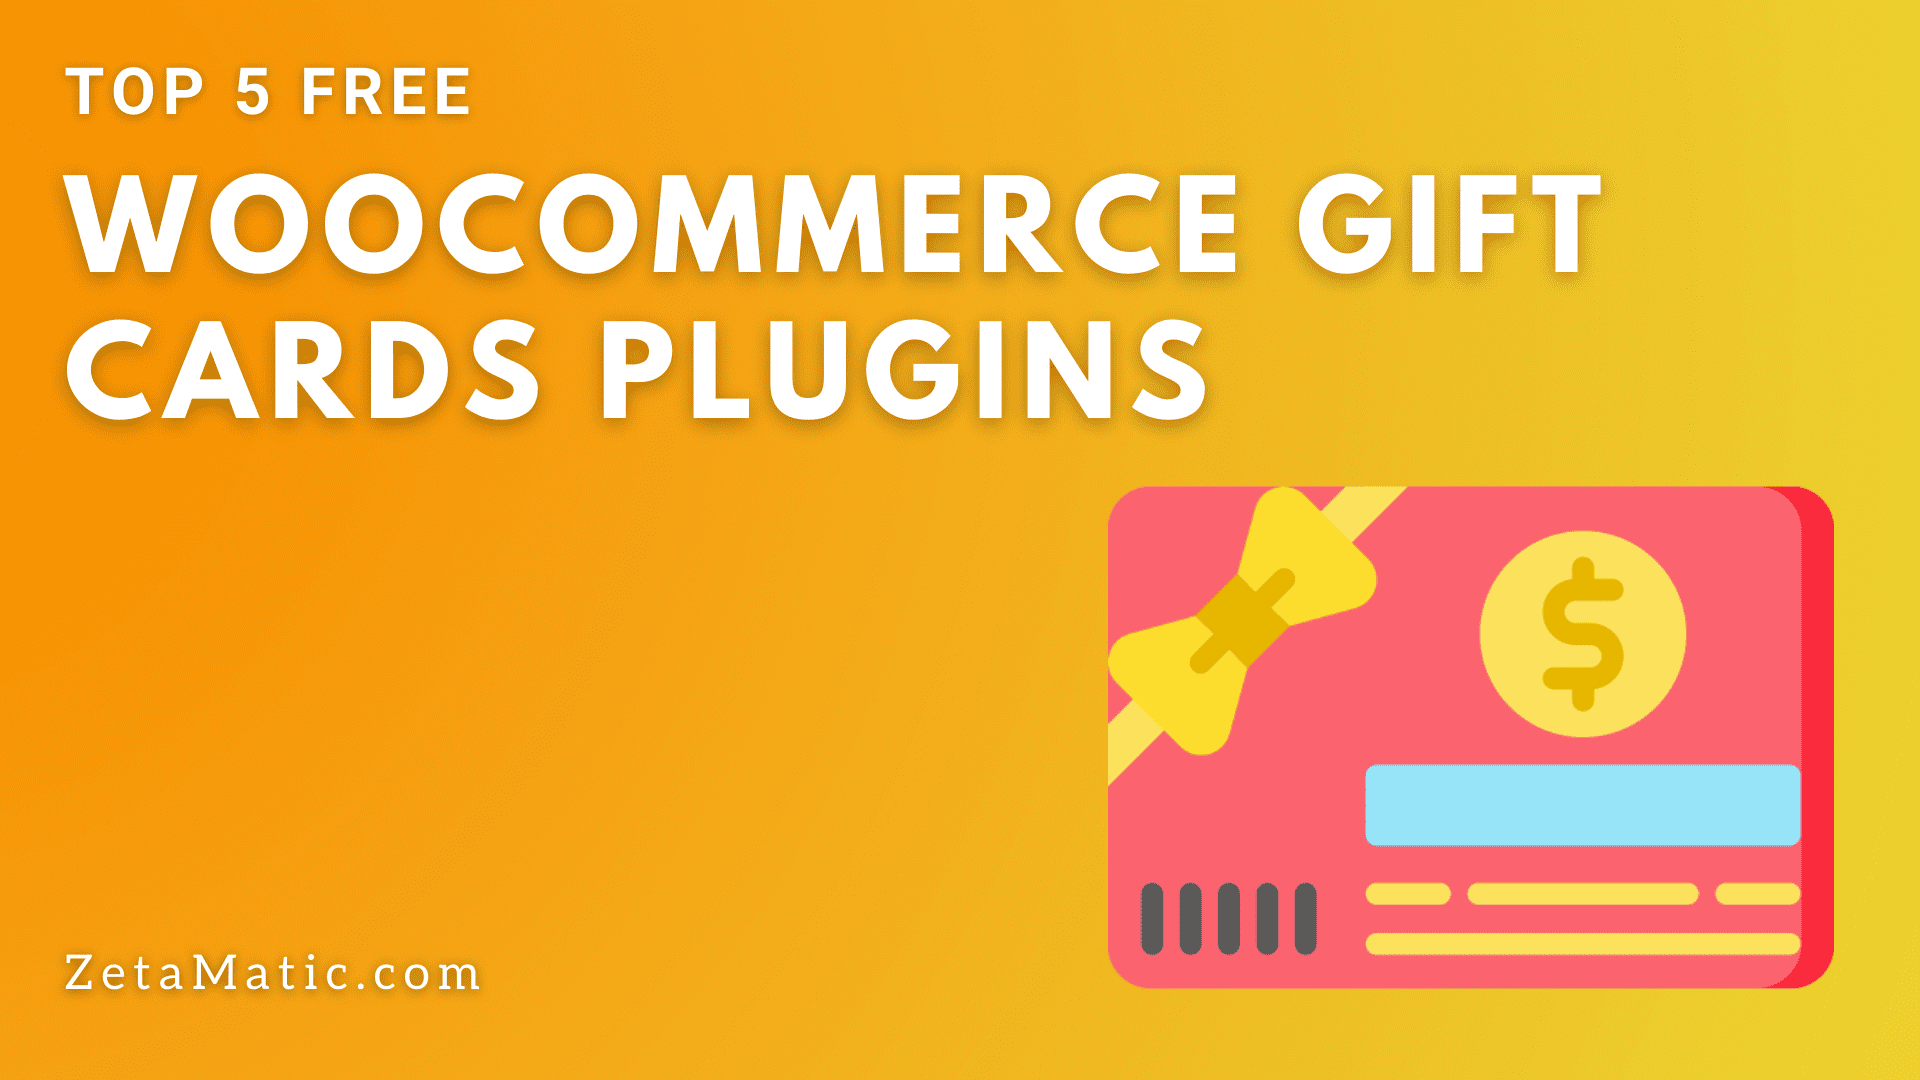 Top 5 Free WooCommerce Gift Cards Plugins